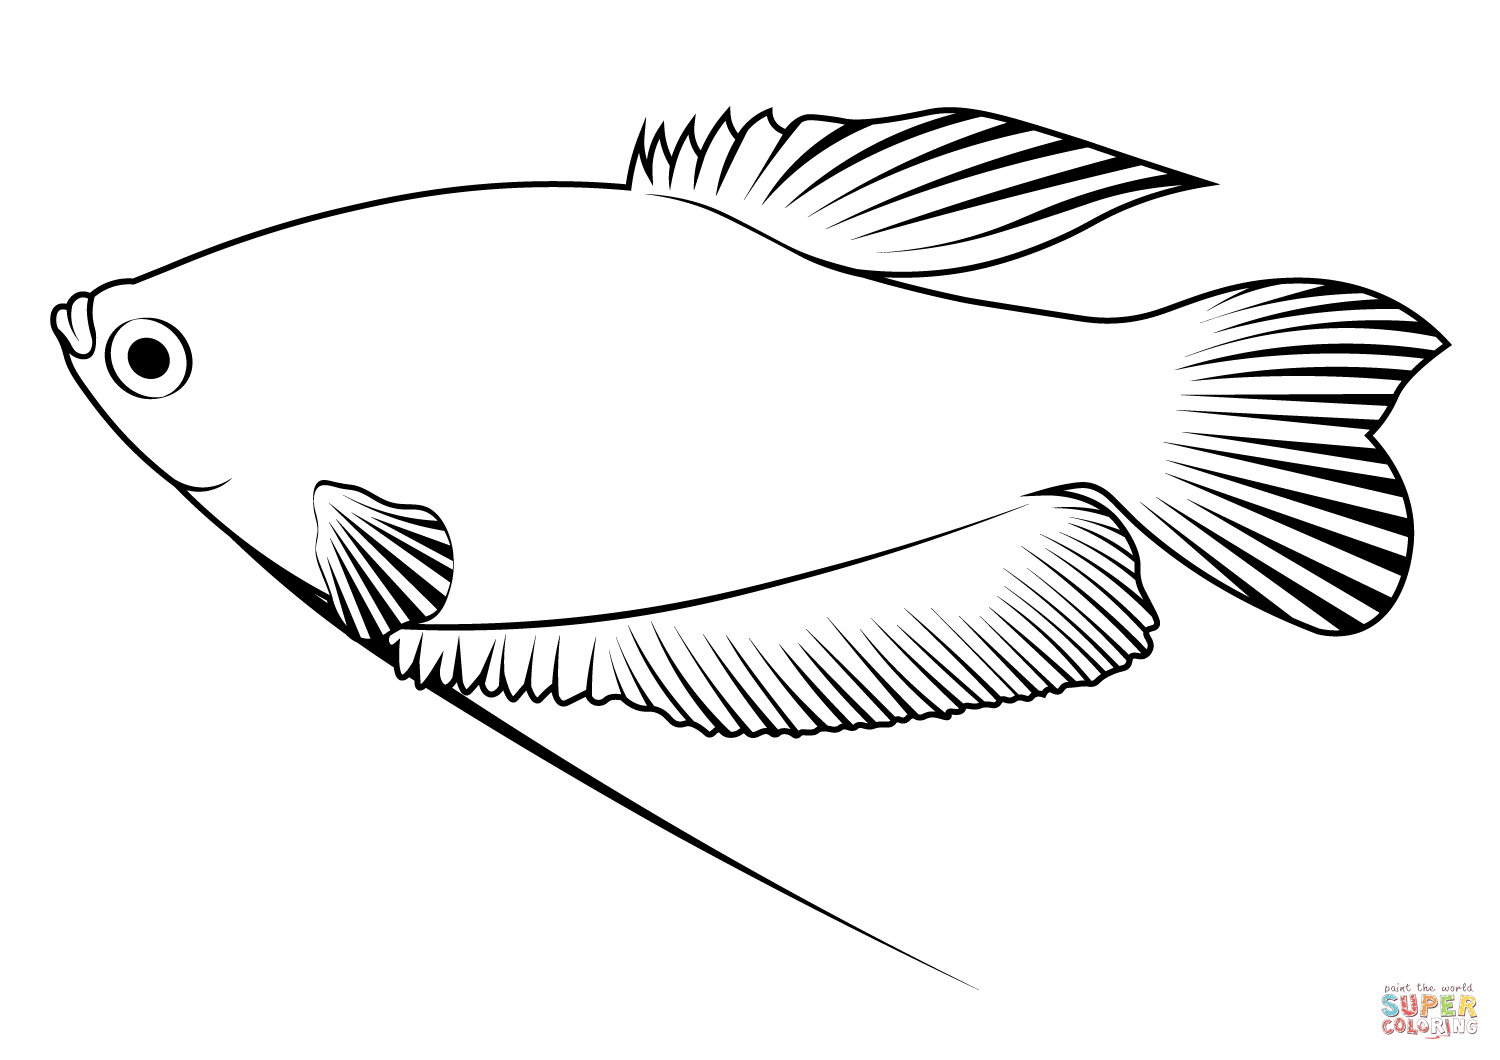 Three spot gourami trichopodus trichopterus coloring page free printable coloring pages